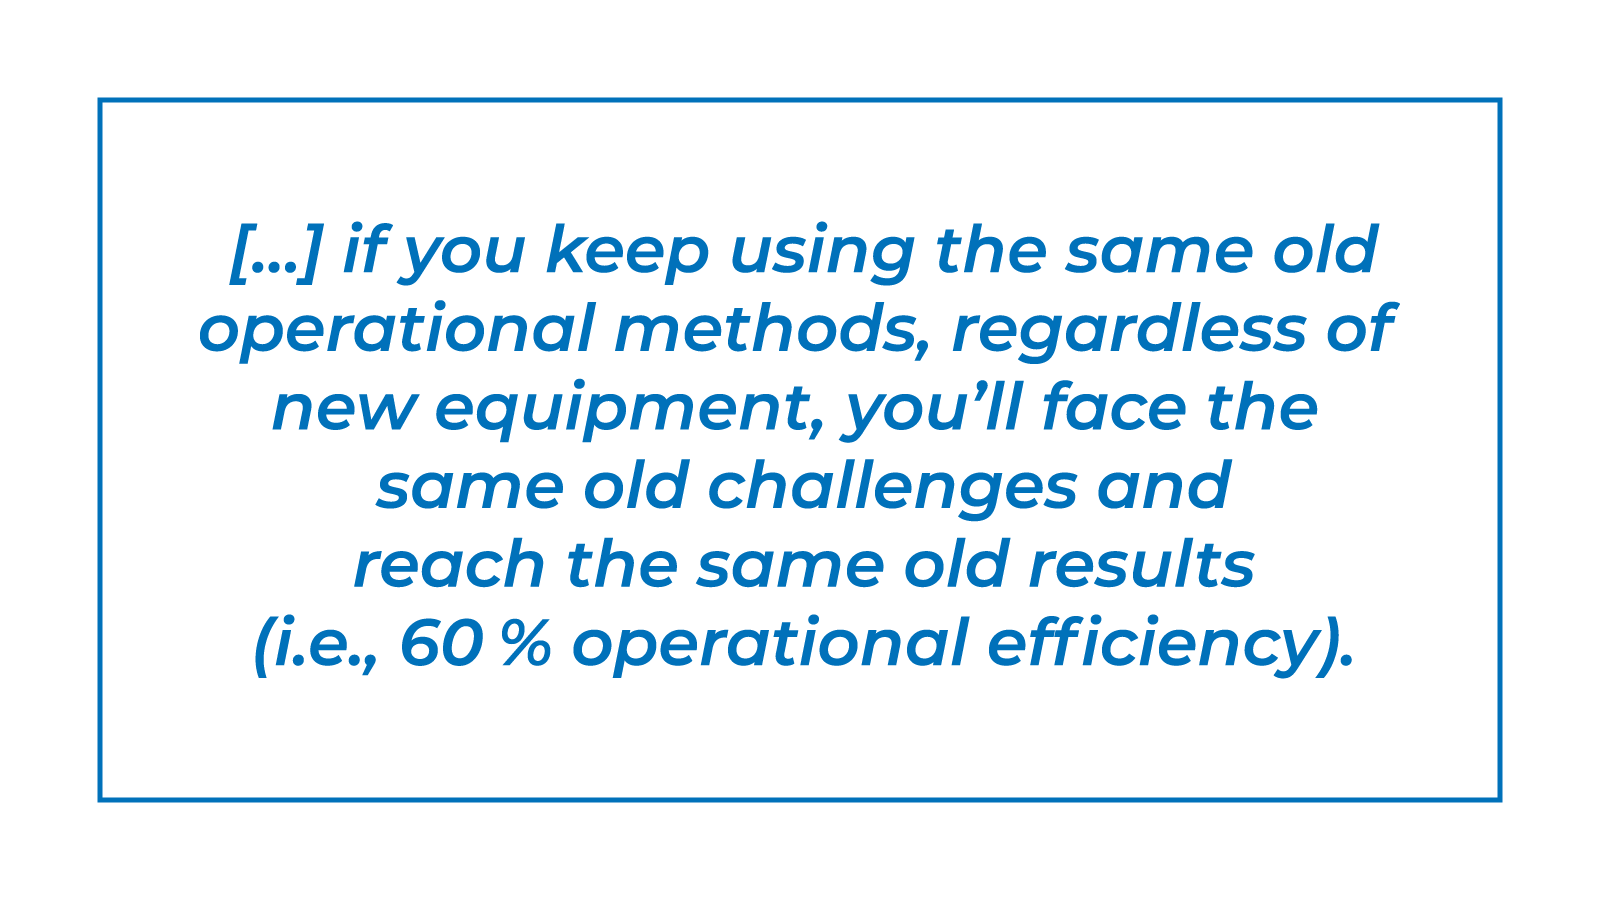 […] if you keep using the same old operational methods, regardless of new equipment, you’ll face the same old challenges and reach the same old results (i.e., 60 % operational efficiency).